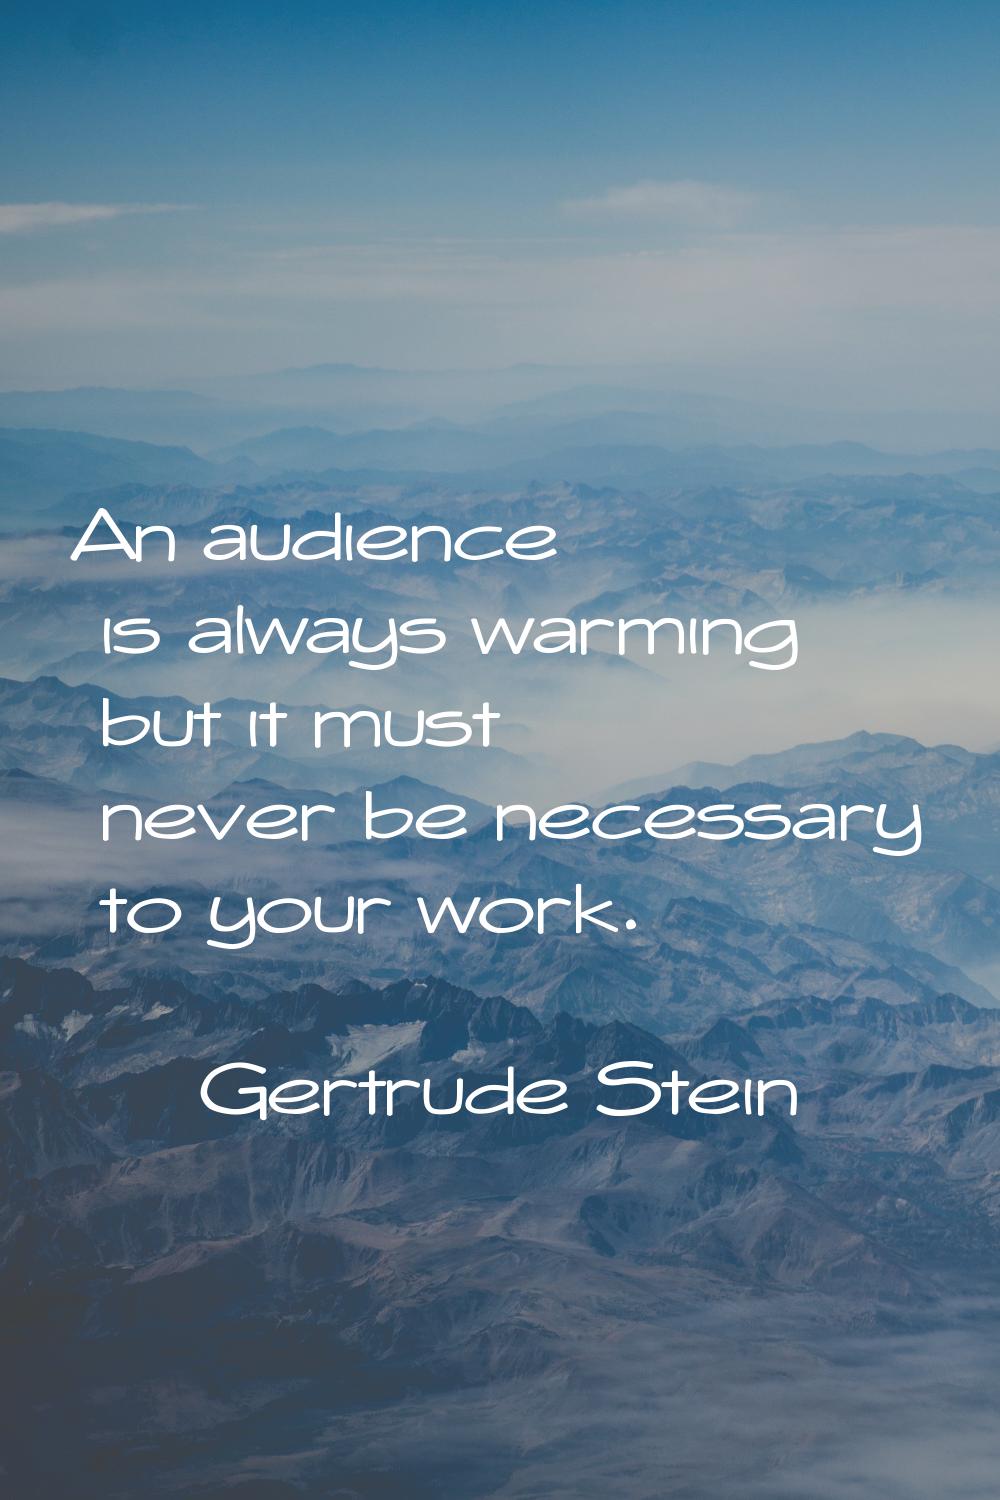 An audience is always warming but it must never be necessary to your work.